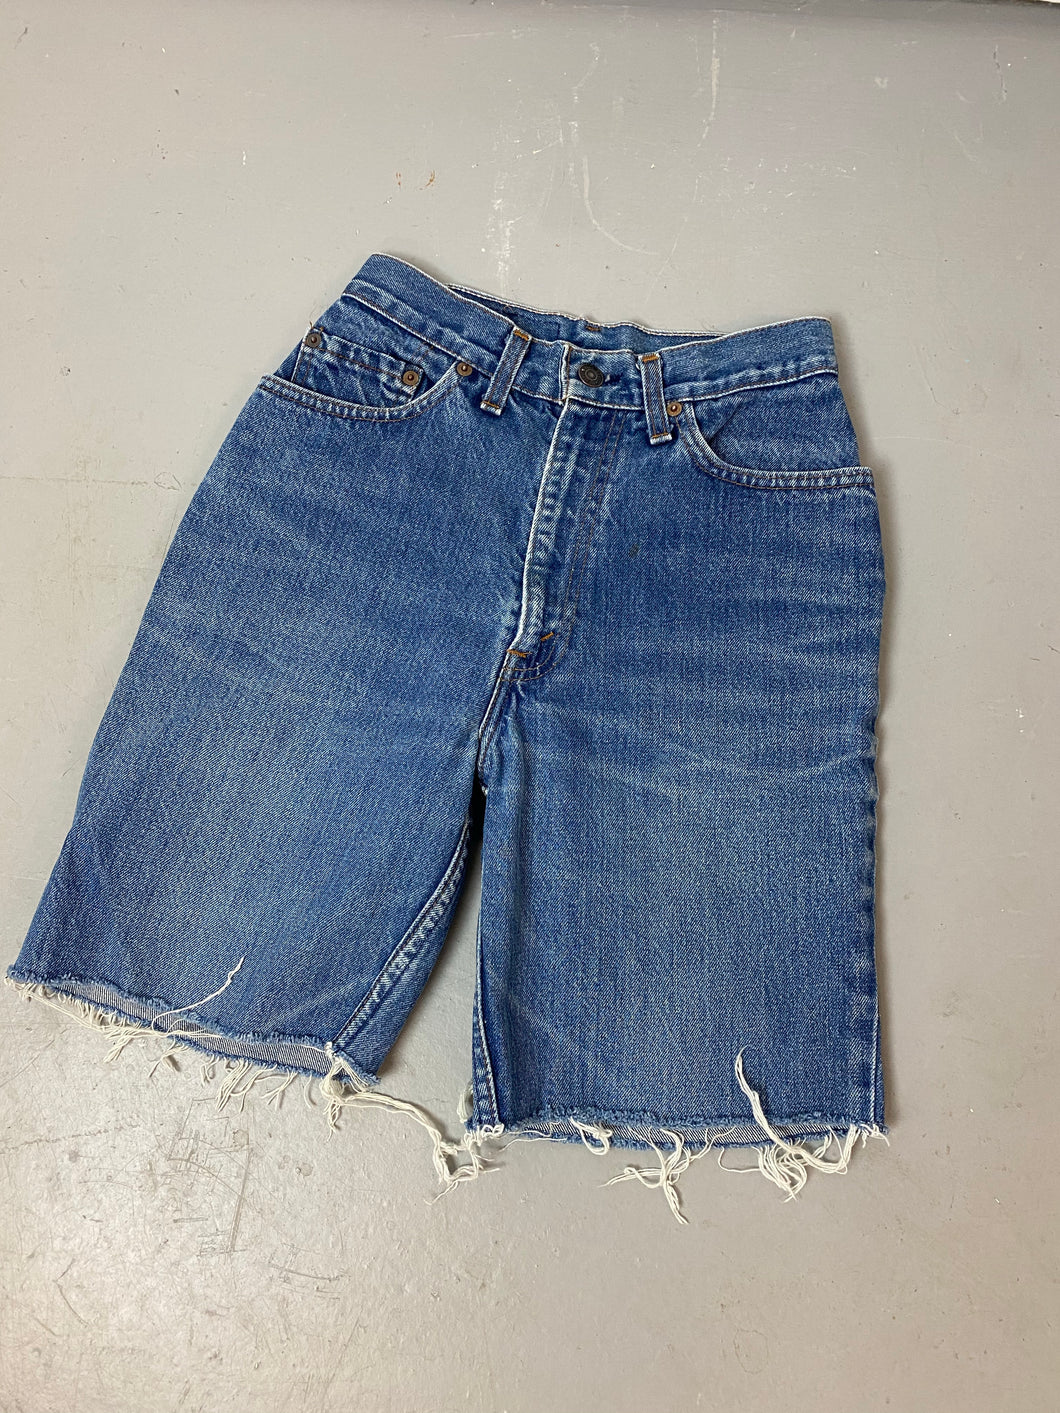 90s High Waisted Levi’s Frayed Denim Shorts - 25in